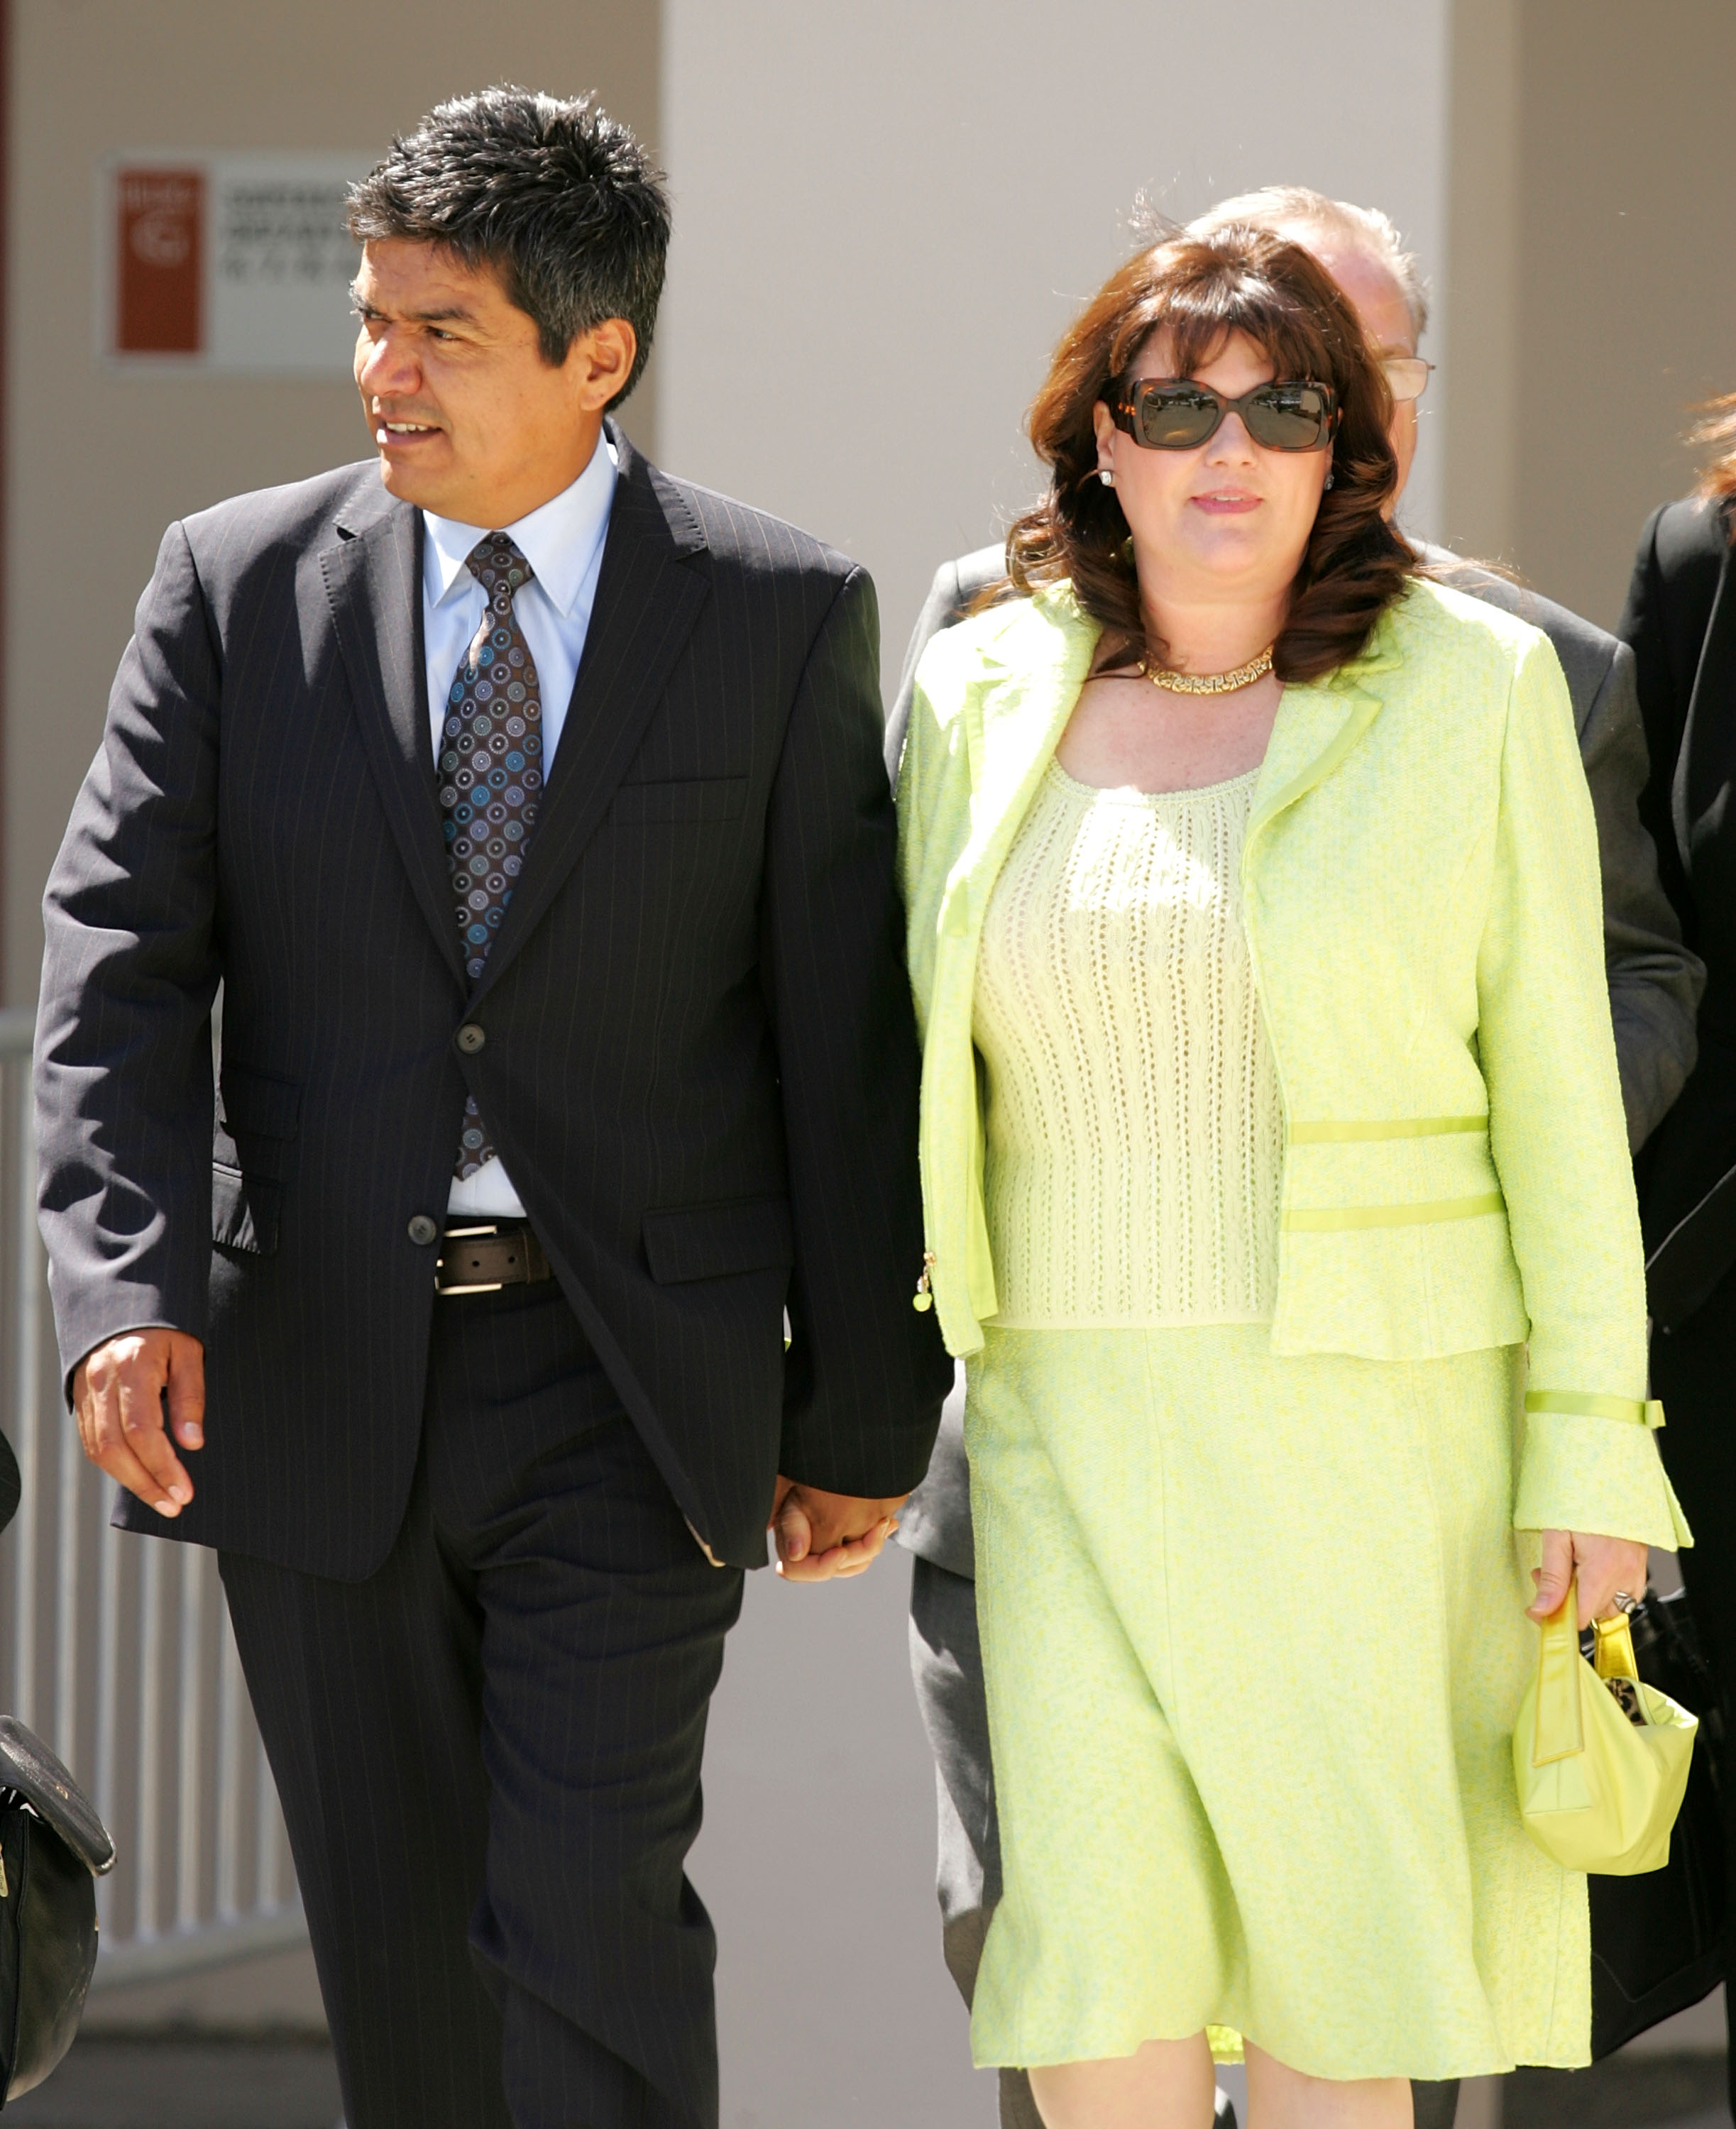 George Lopez and Anna Serrano pictured leaving the Santa Maria Superior Court on March 28, 2005 in Santa Maria, California. | Source: Getty Images